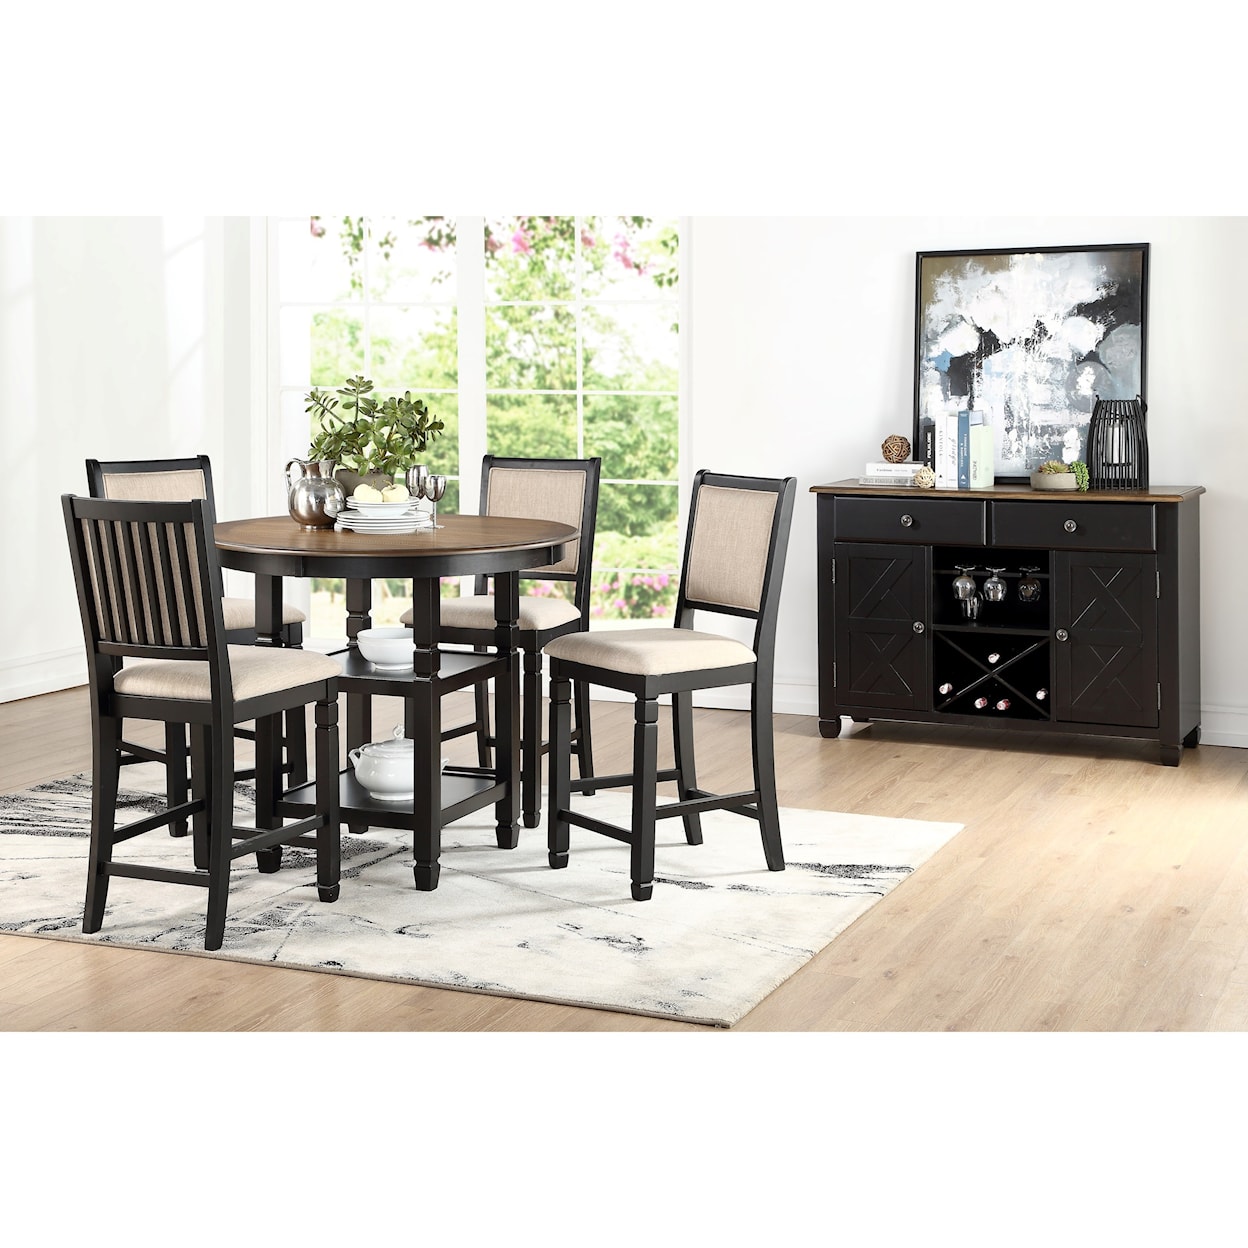 New Classic Prairie Point Dining Room Group